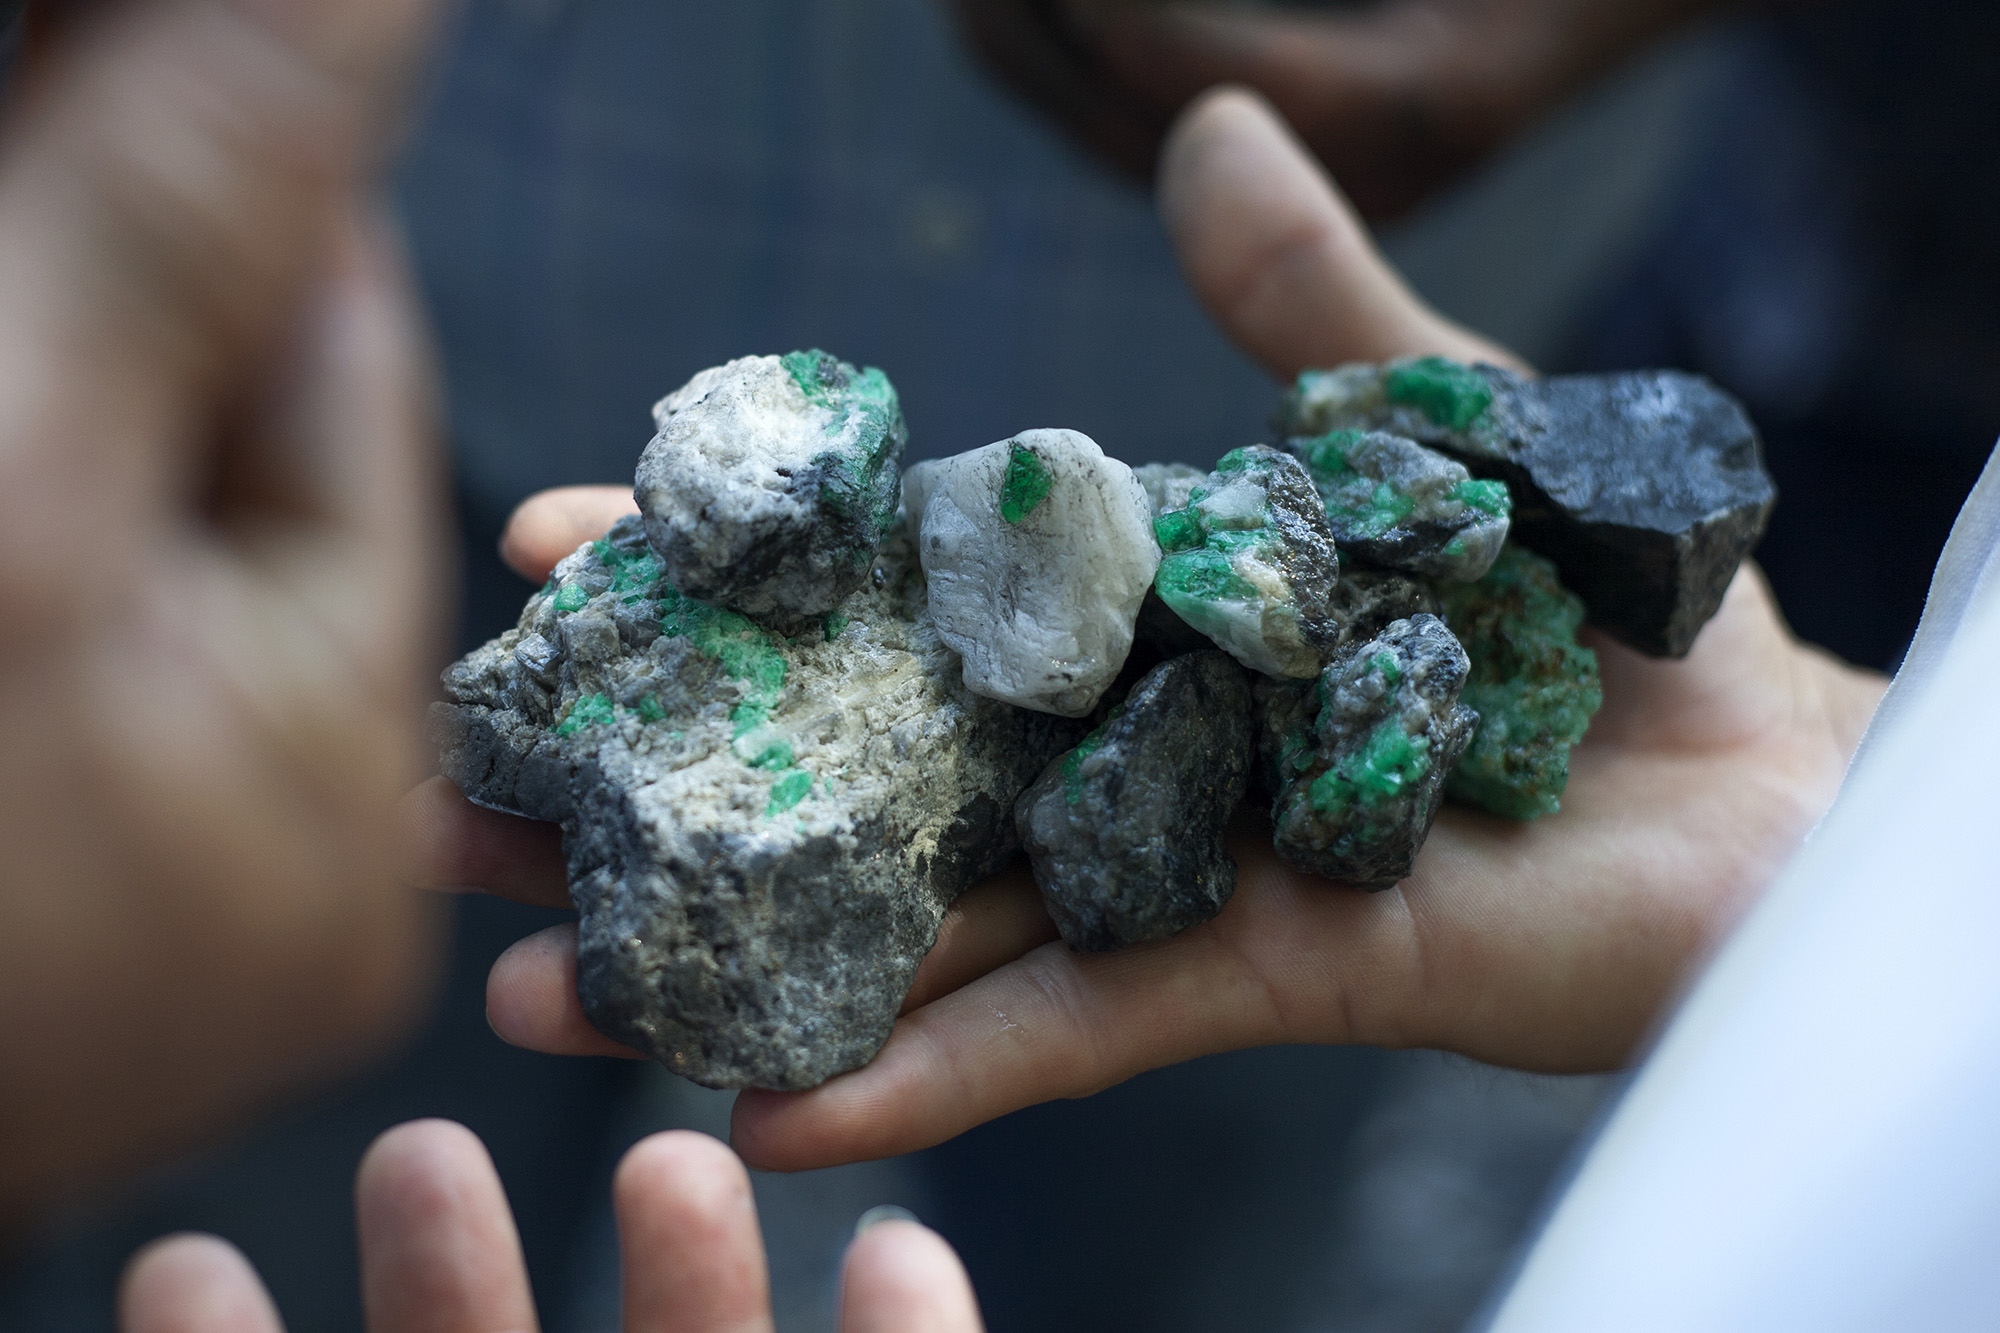 Muzo - "Morrallas" or emeralds of lesser value, in the...